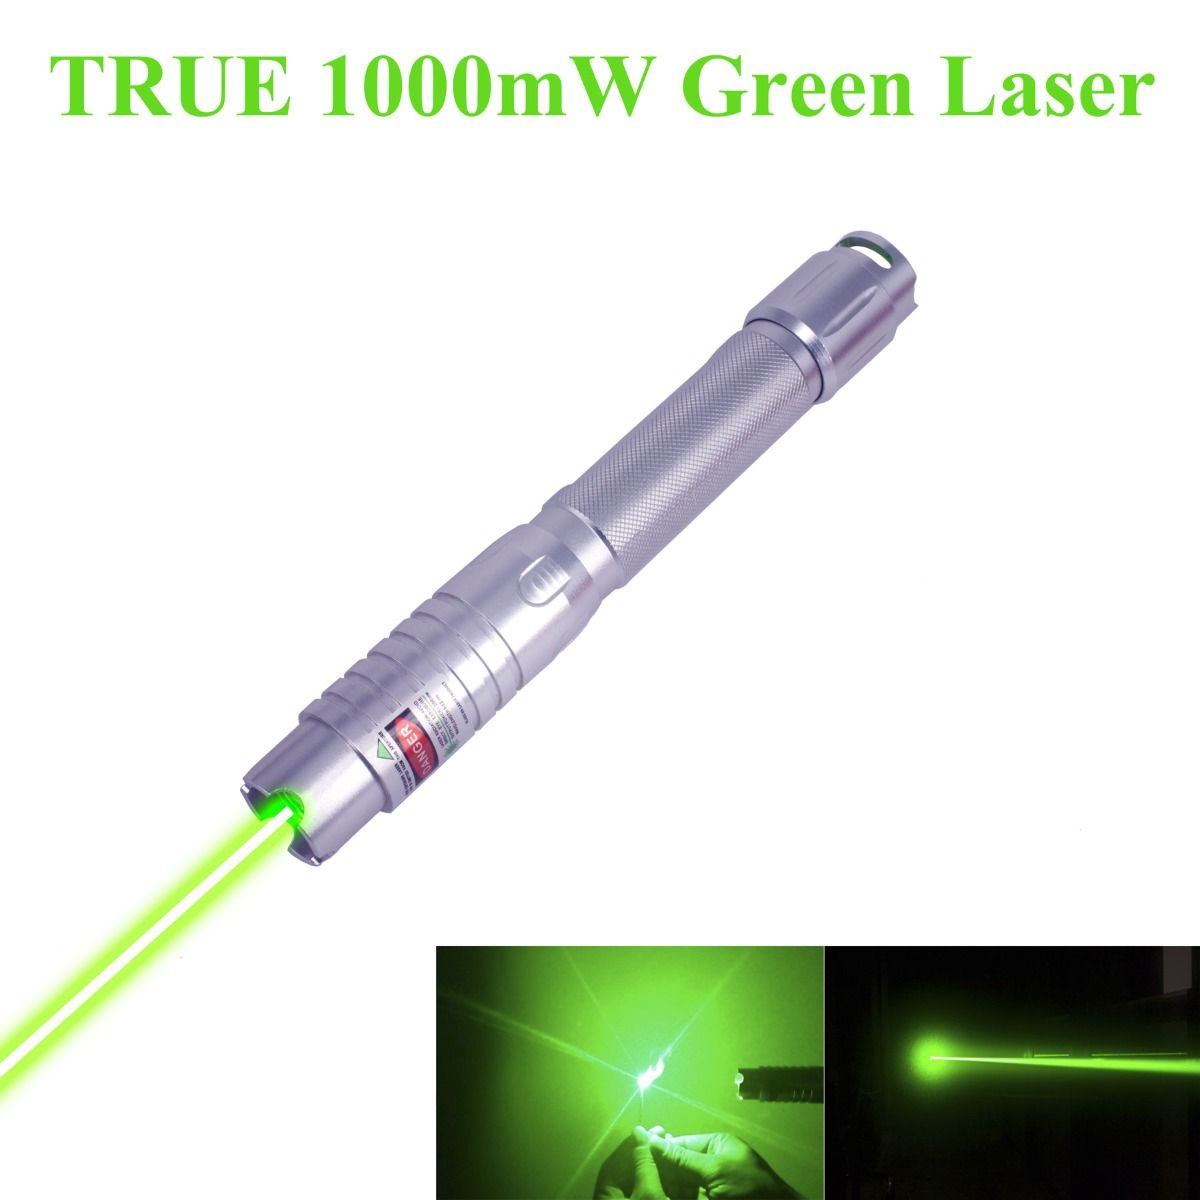 1000mW 532nm Best Green High Power Burning Laser Pointer - Black Shell -  G970 - Cool Laser Pointers